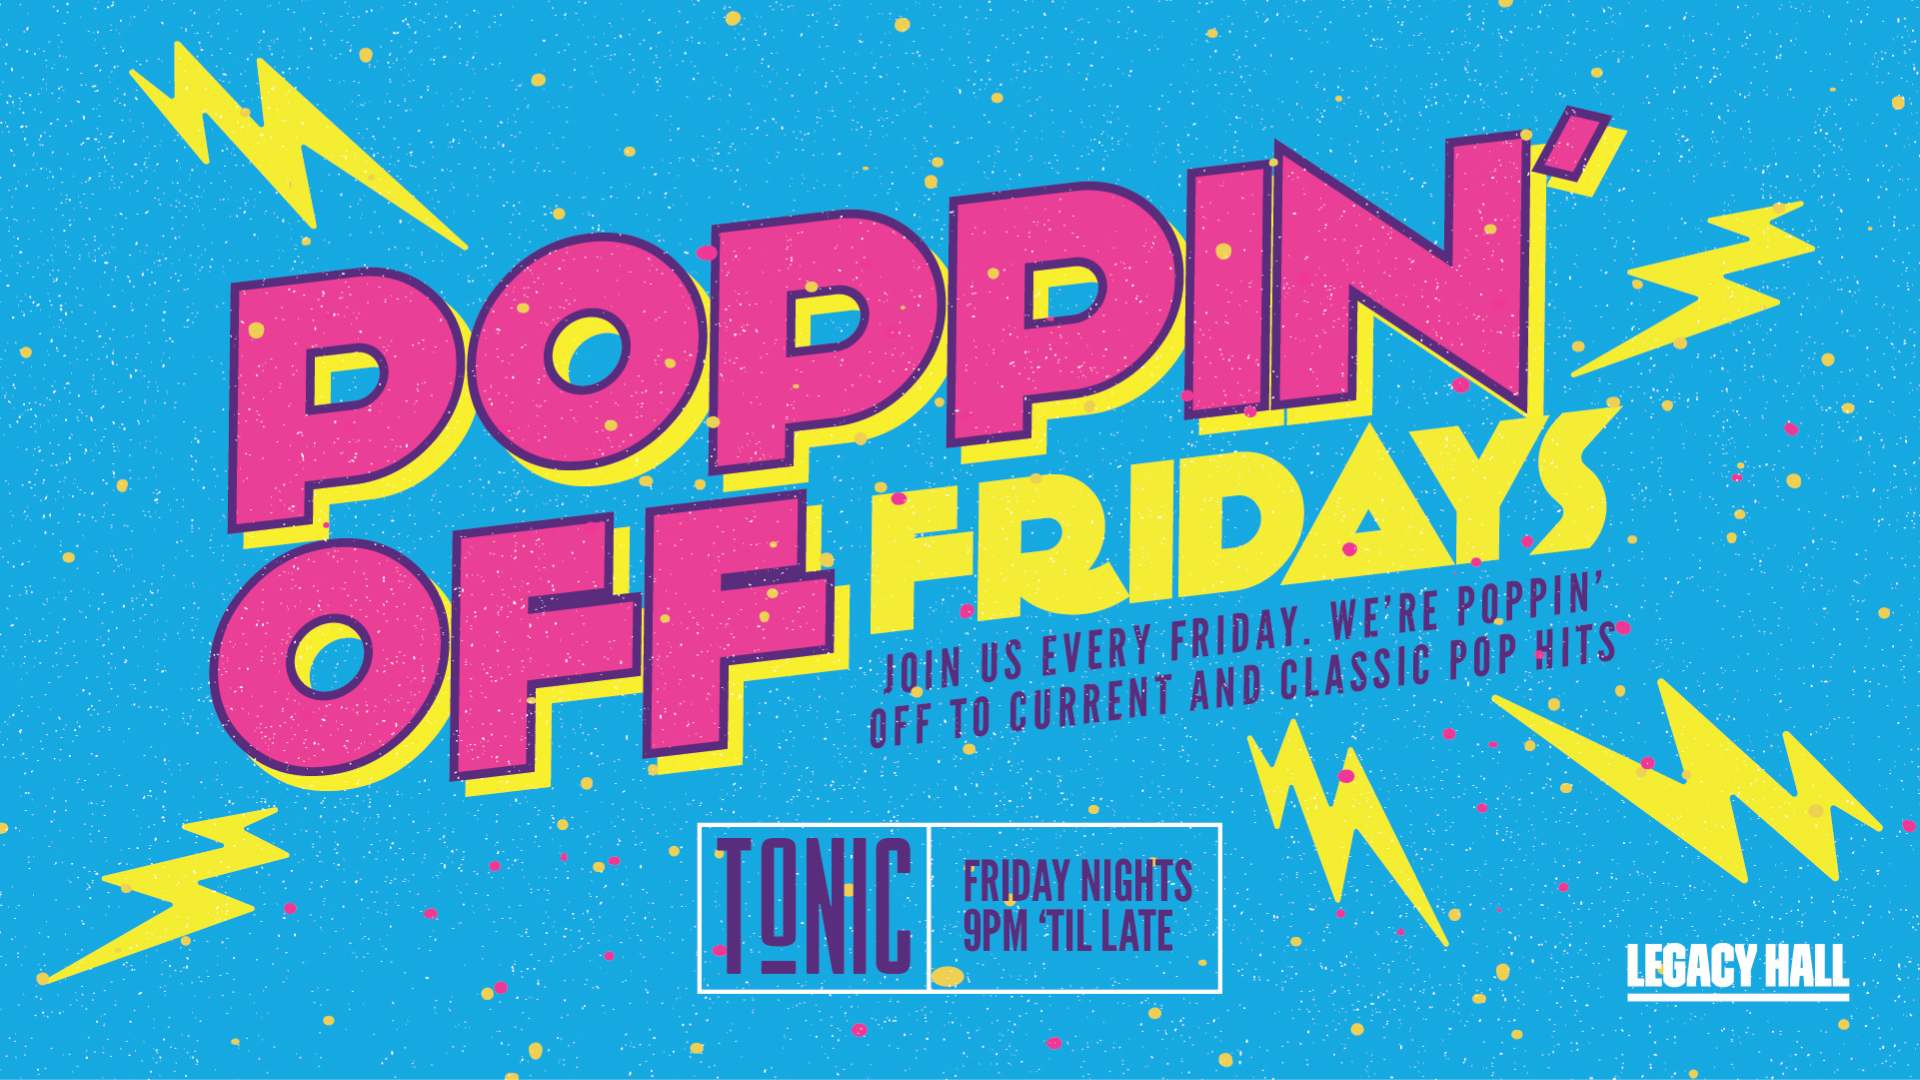 Promo image of Friday Poppin’ Off 